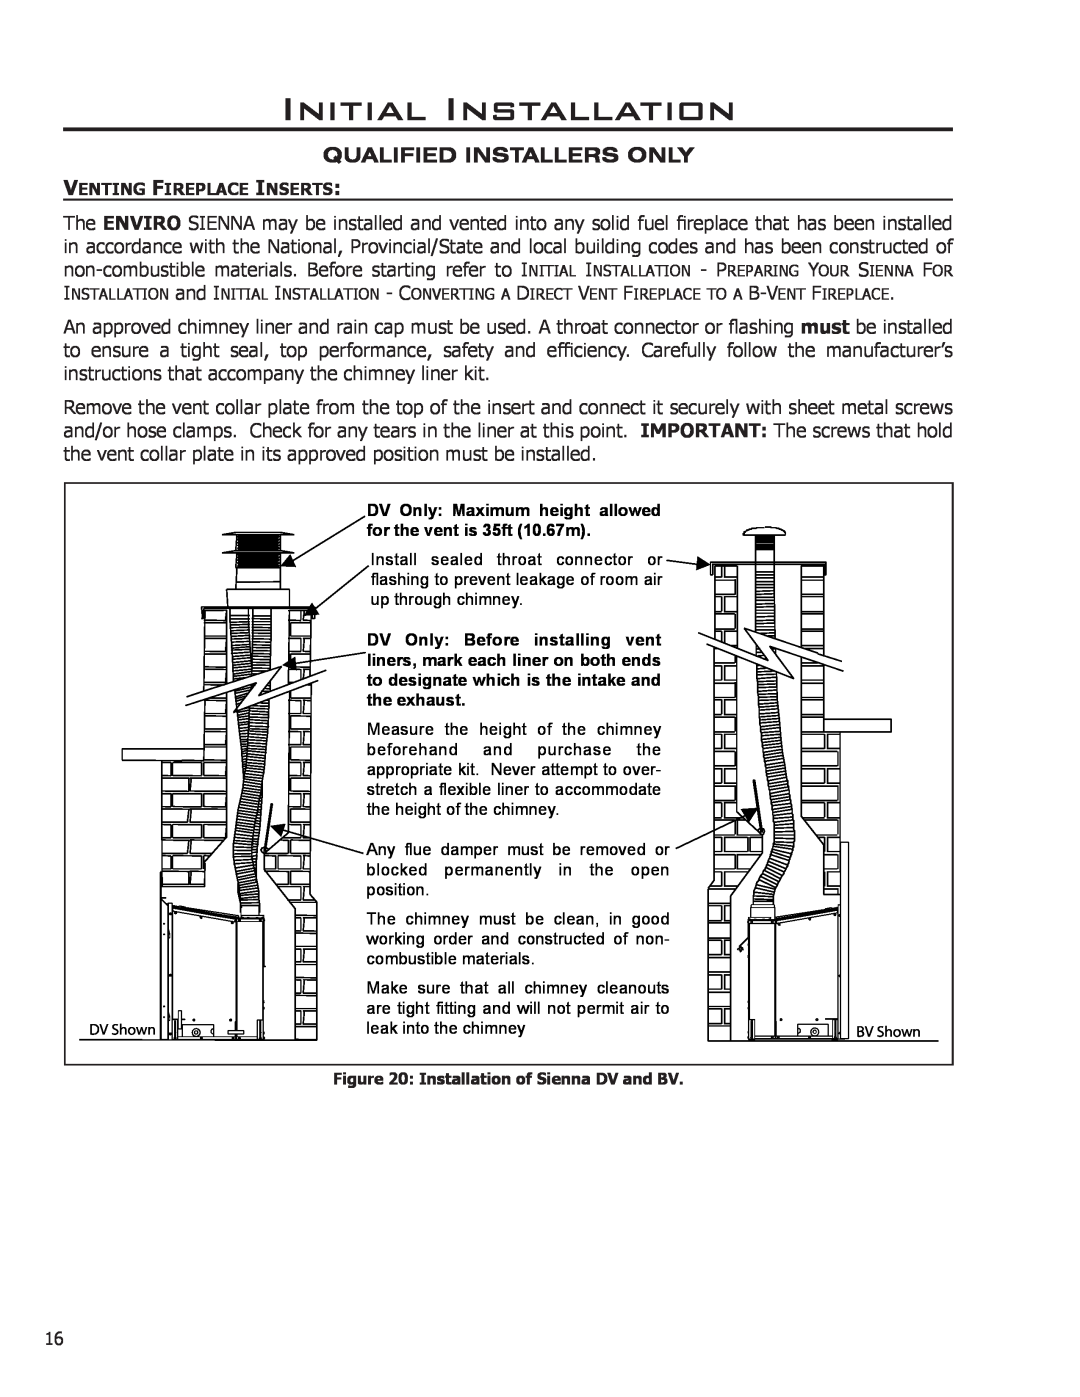 Enviro Indoor Gas Fireplace owner manual Initial Installation, Qualified Installers Only, Venting Fireplace Inserts 